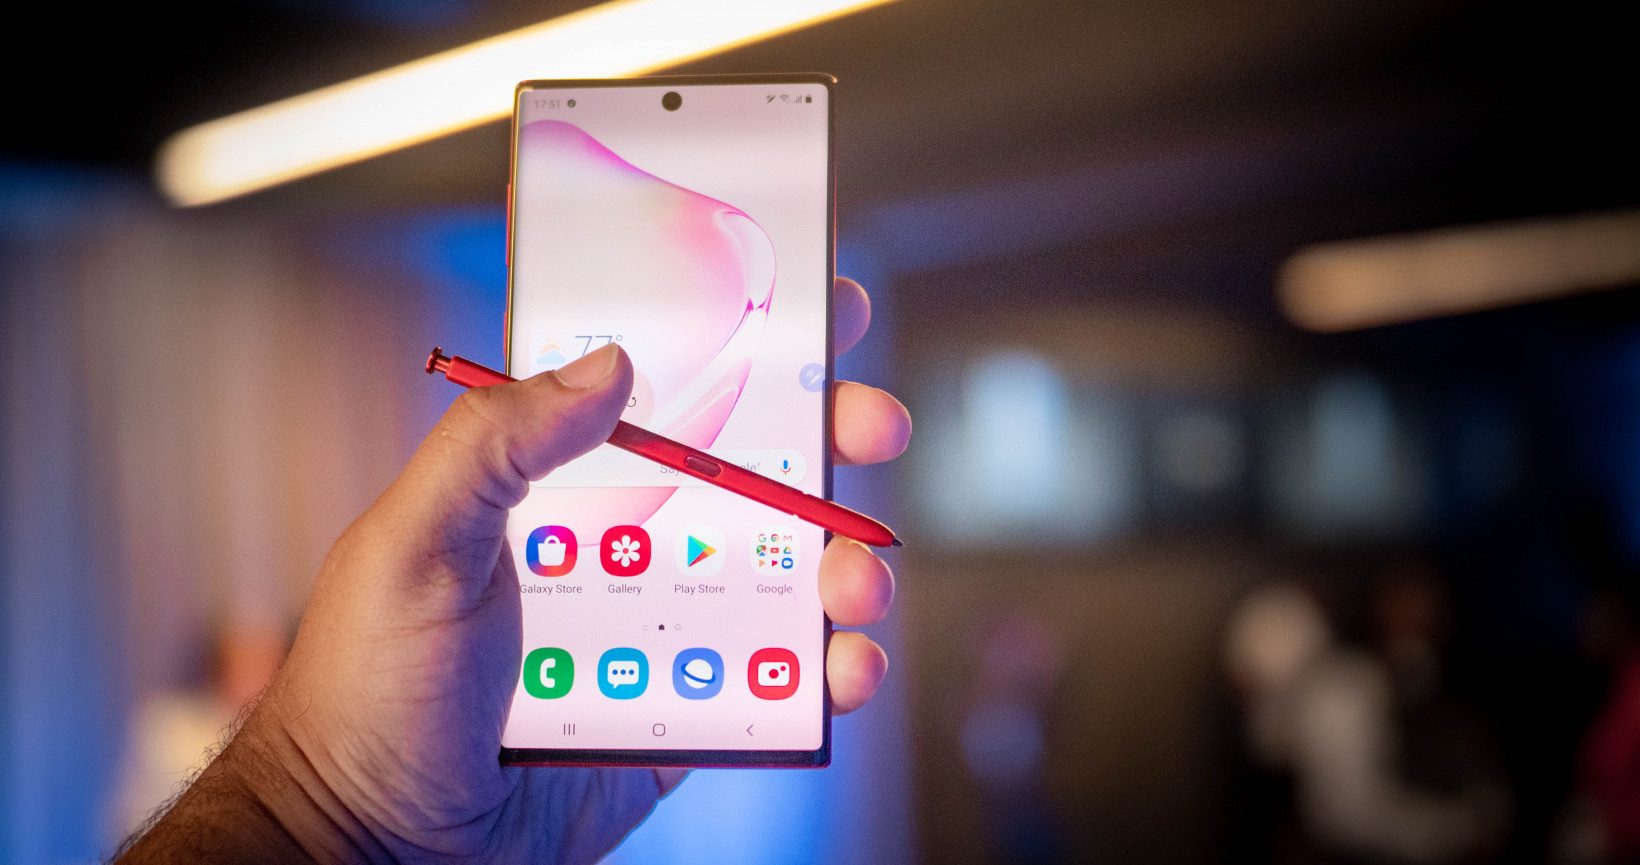 Samsung Galaxy Note 10 review: Finally, an S Pen in a smaller phone